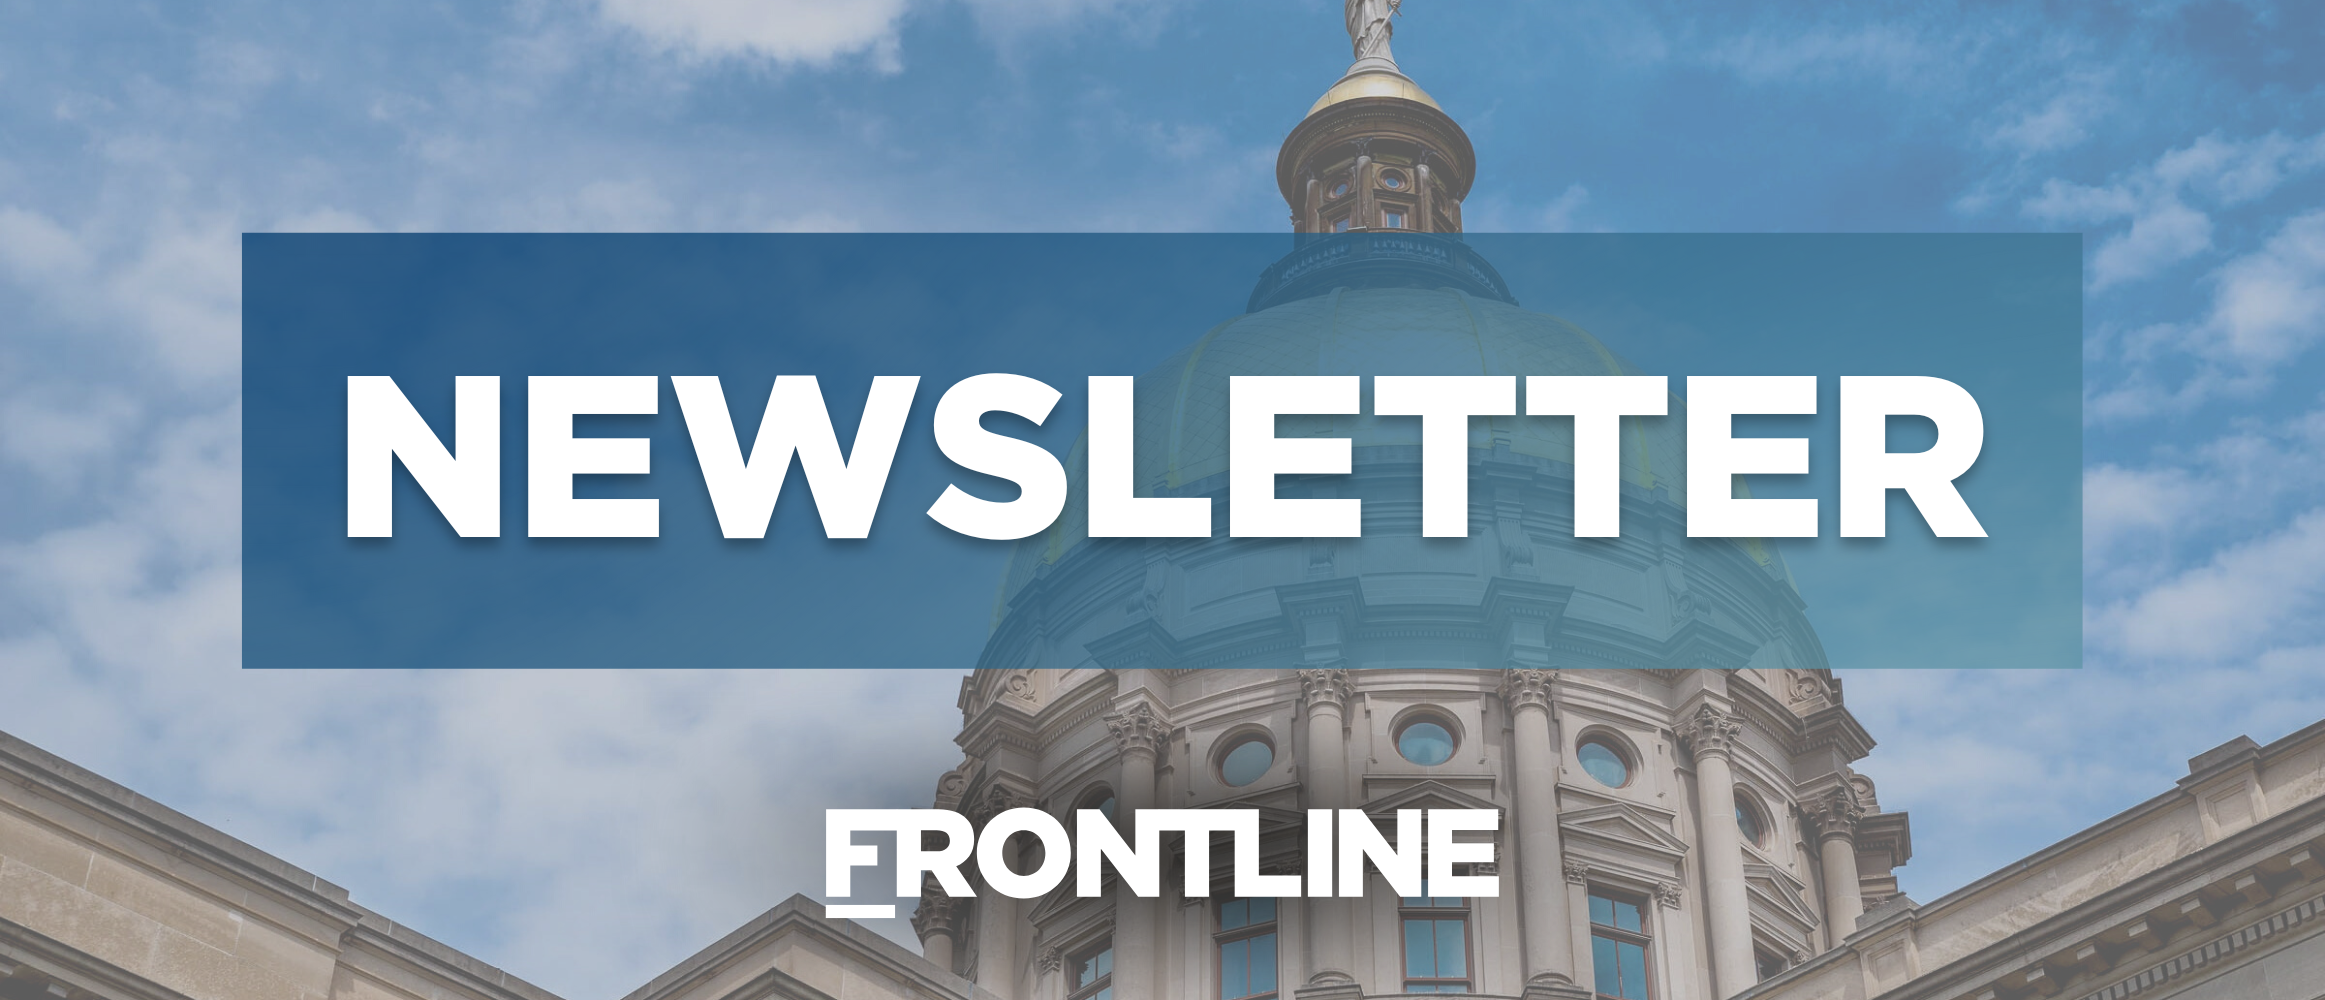 Frontline Policy Council Newsletter